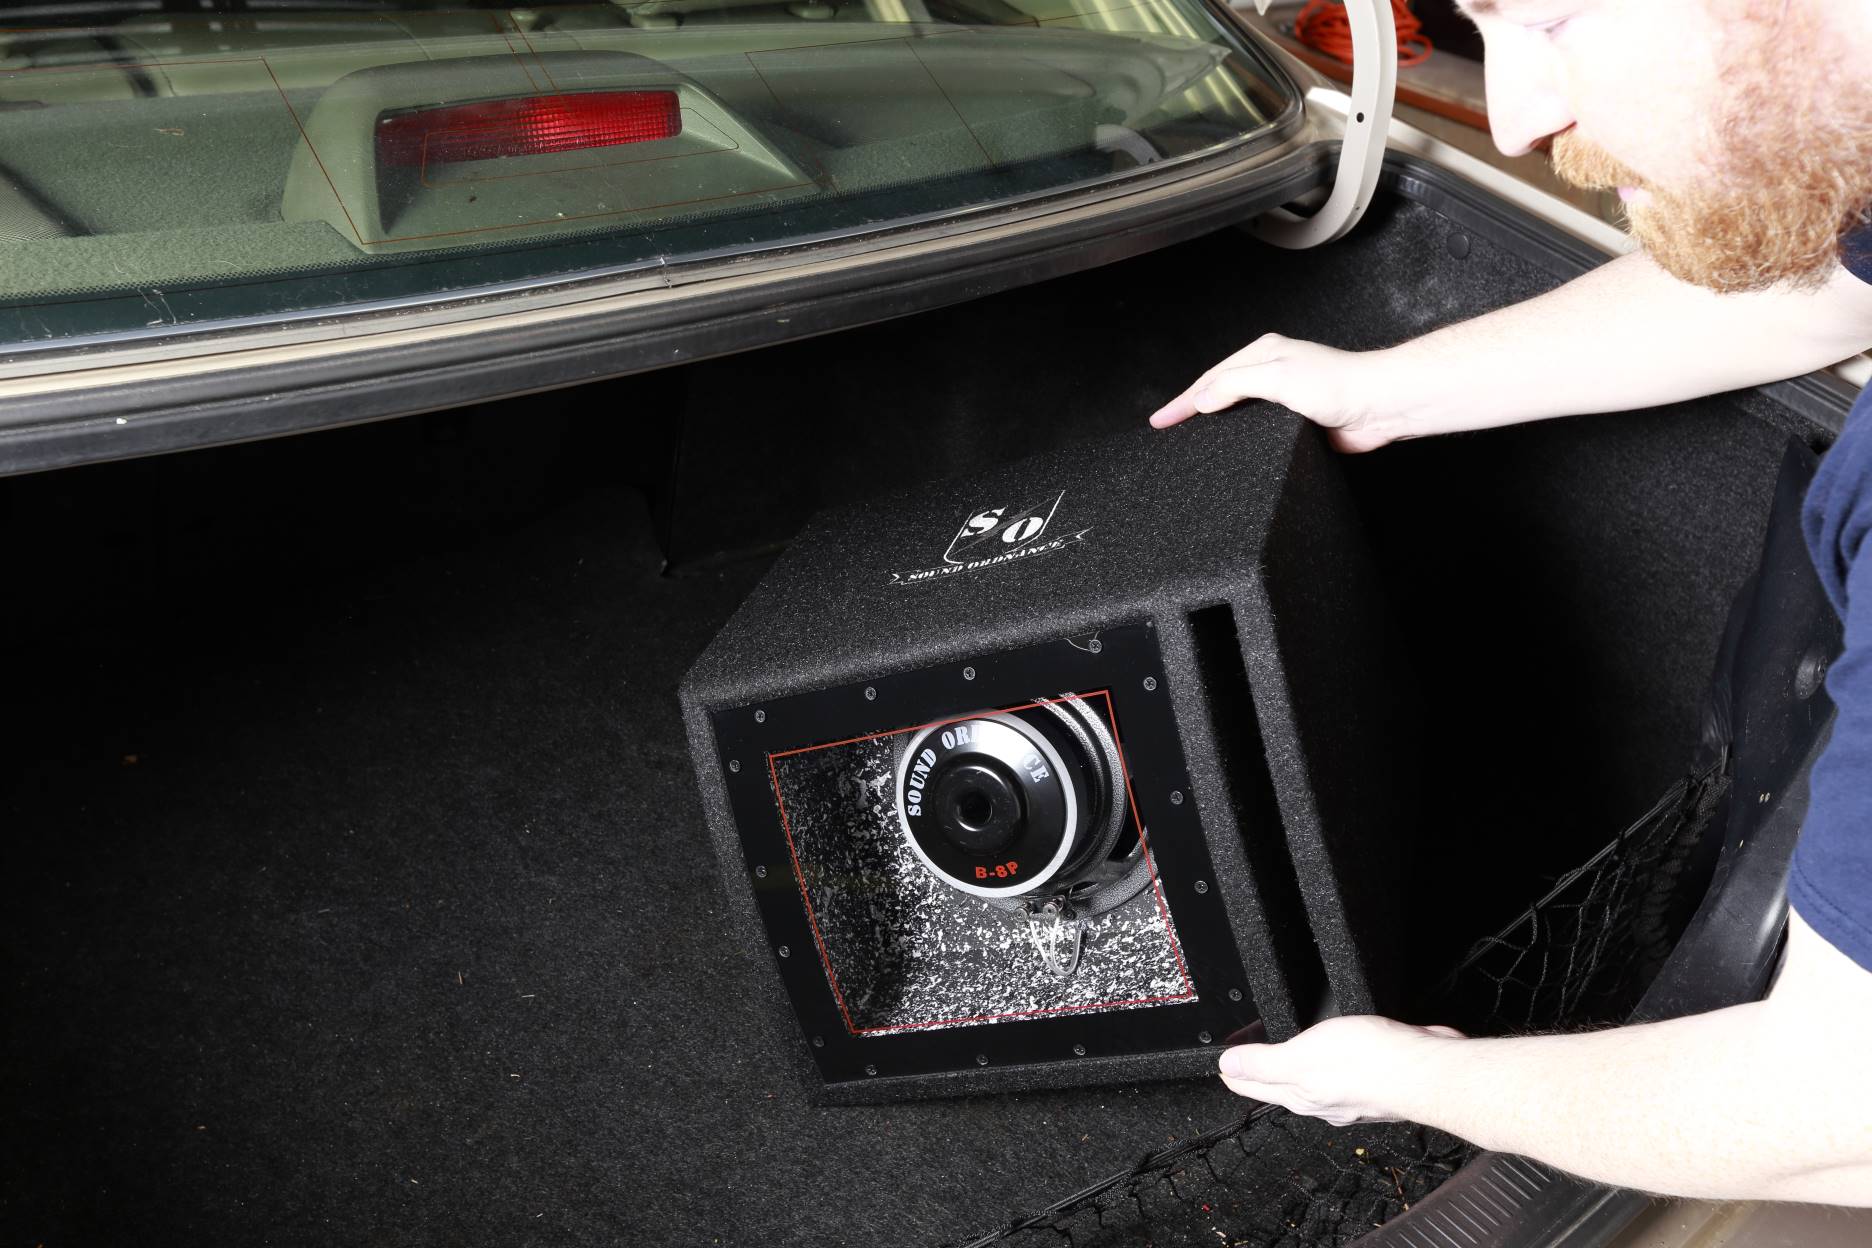 How To Hook Up A Subwoofer In A Car